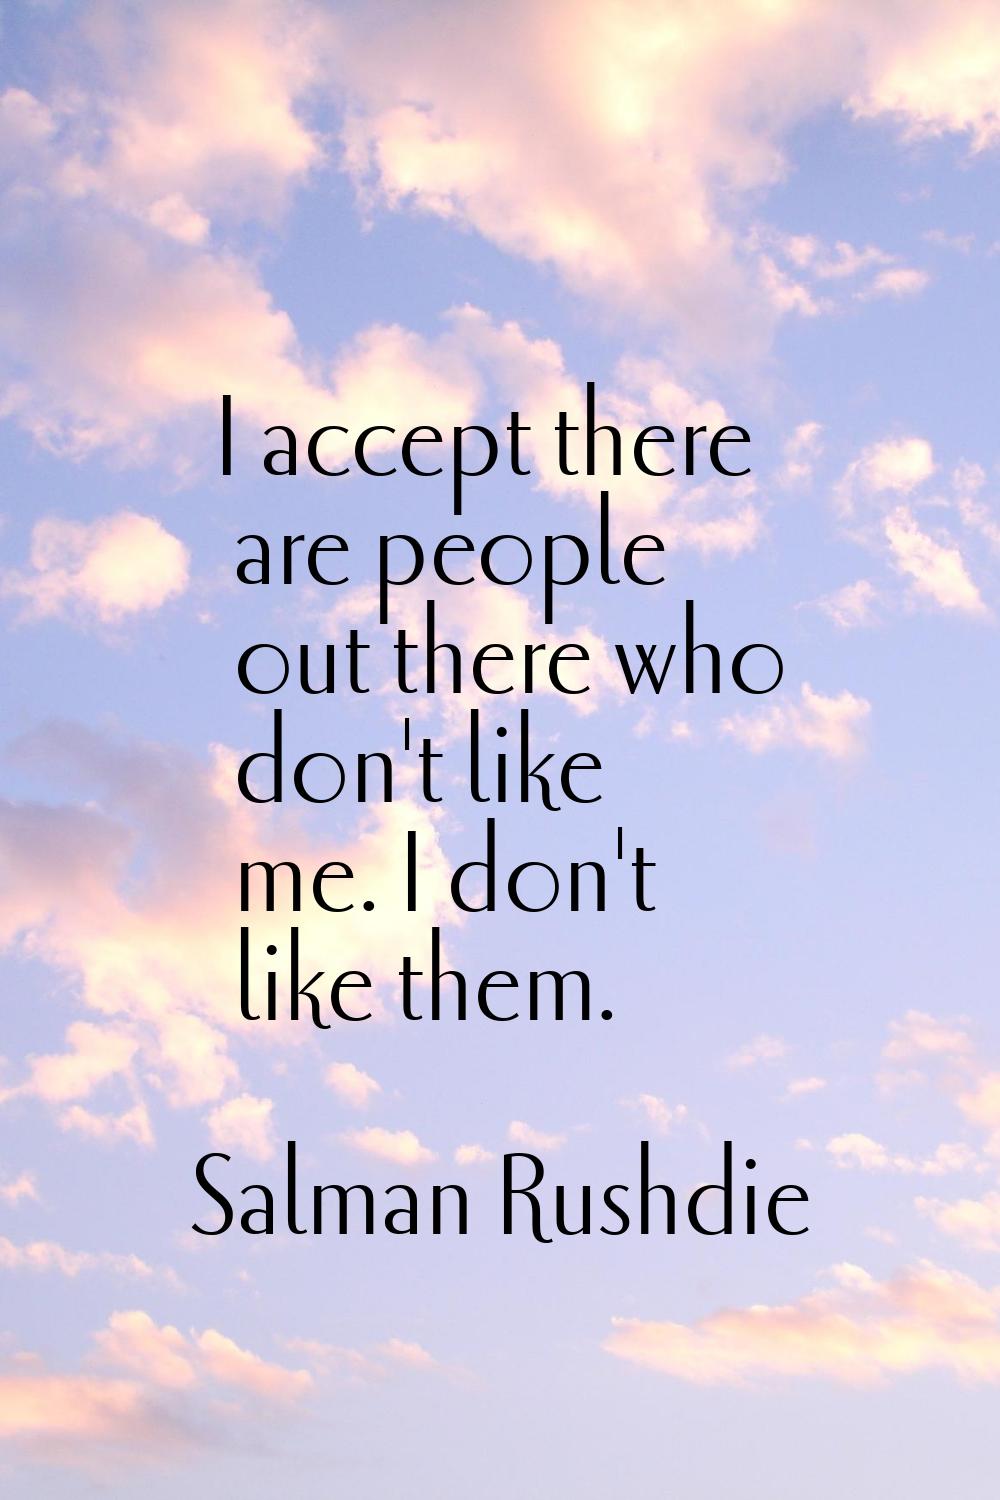 I accept there are people out there who don't like me. I don't like them.